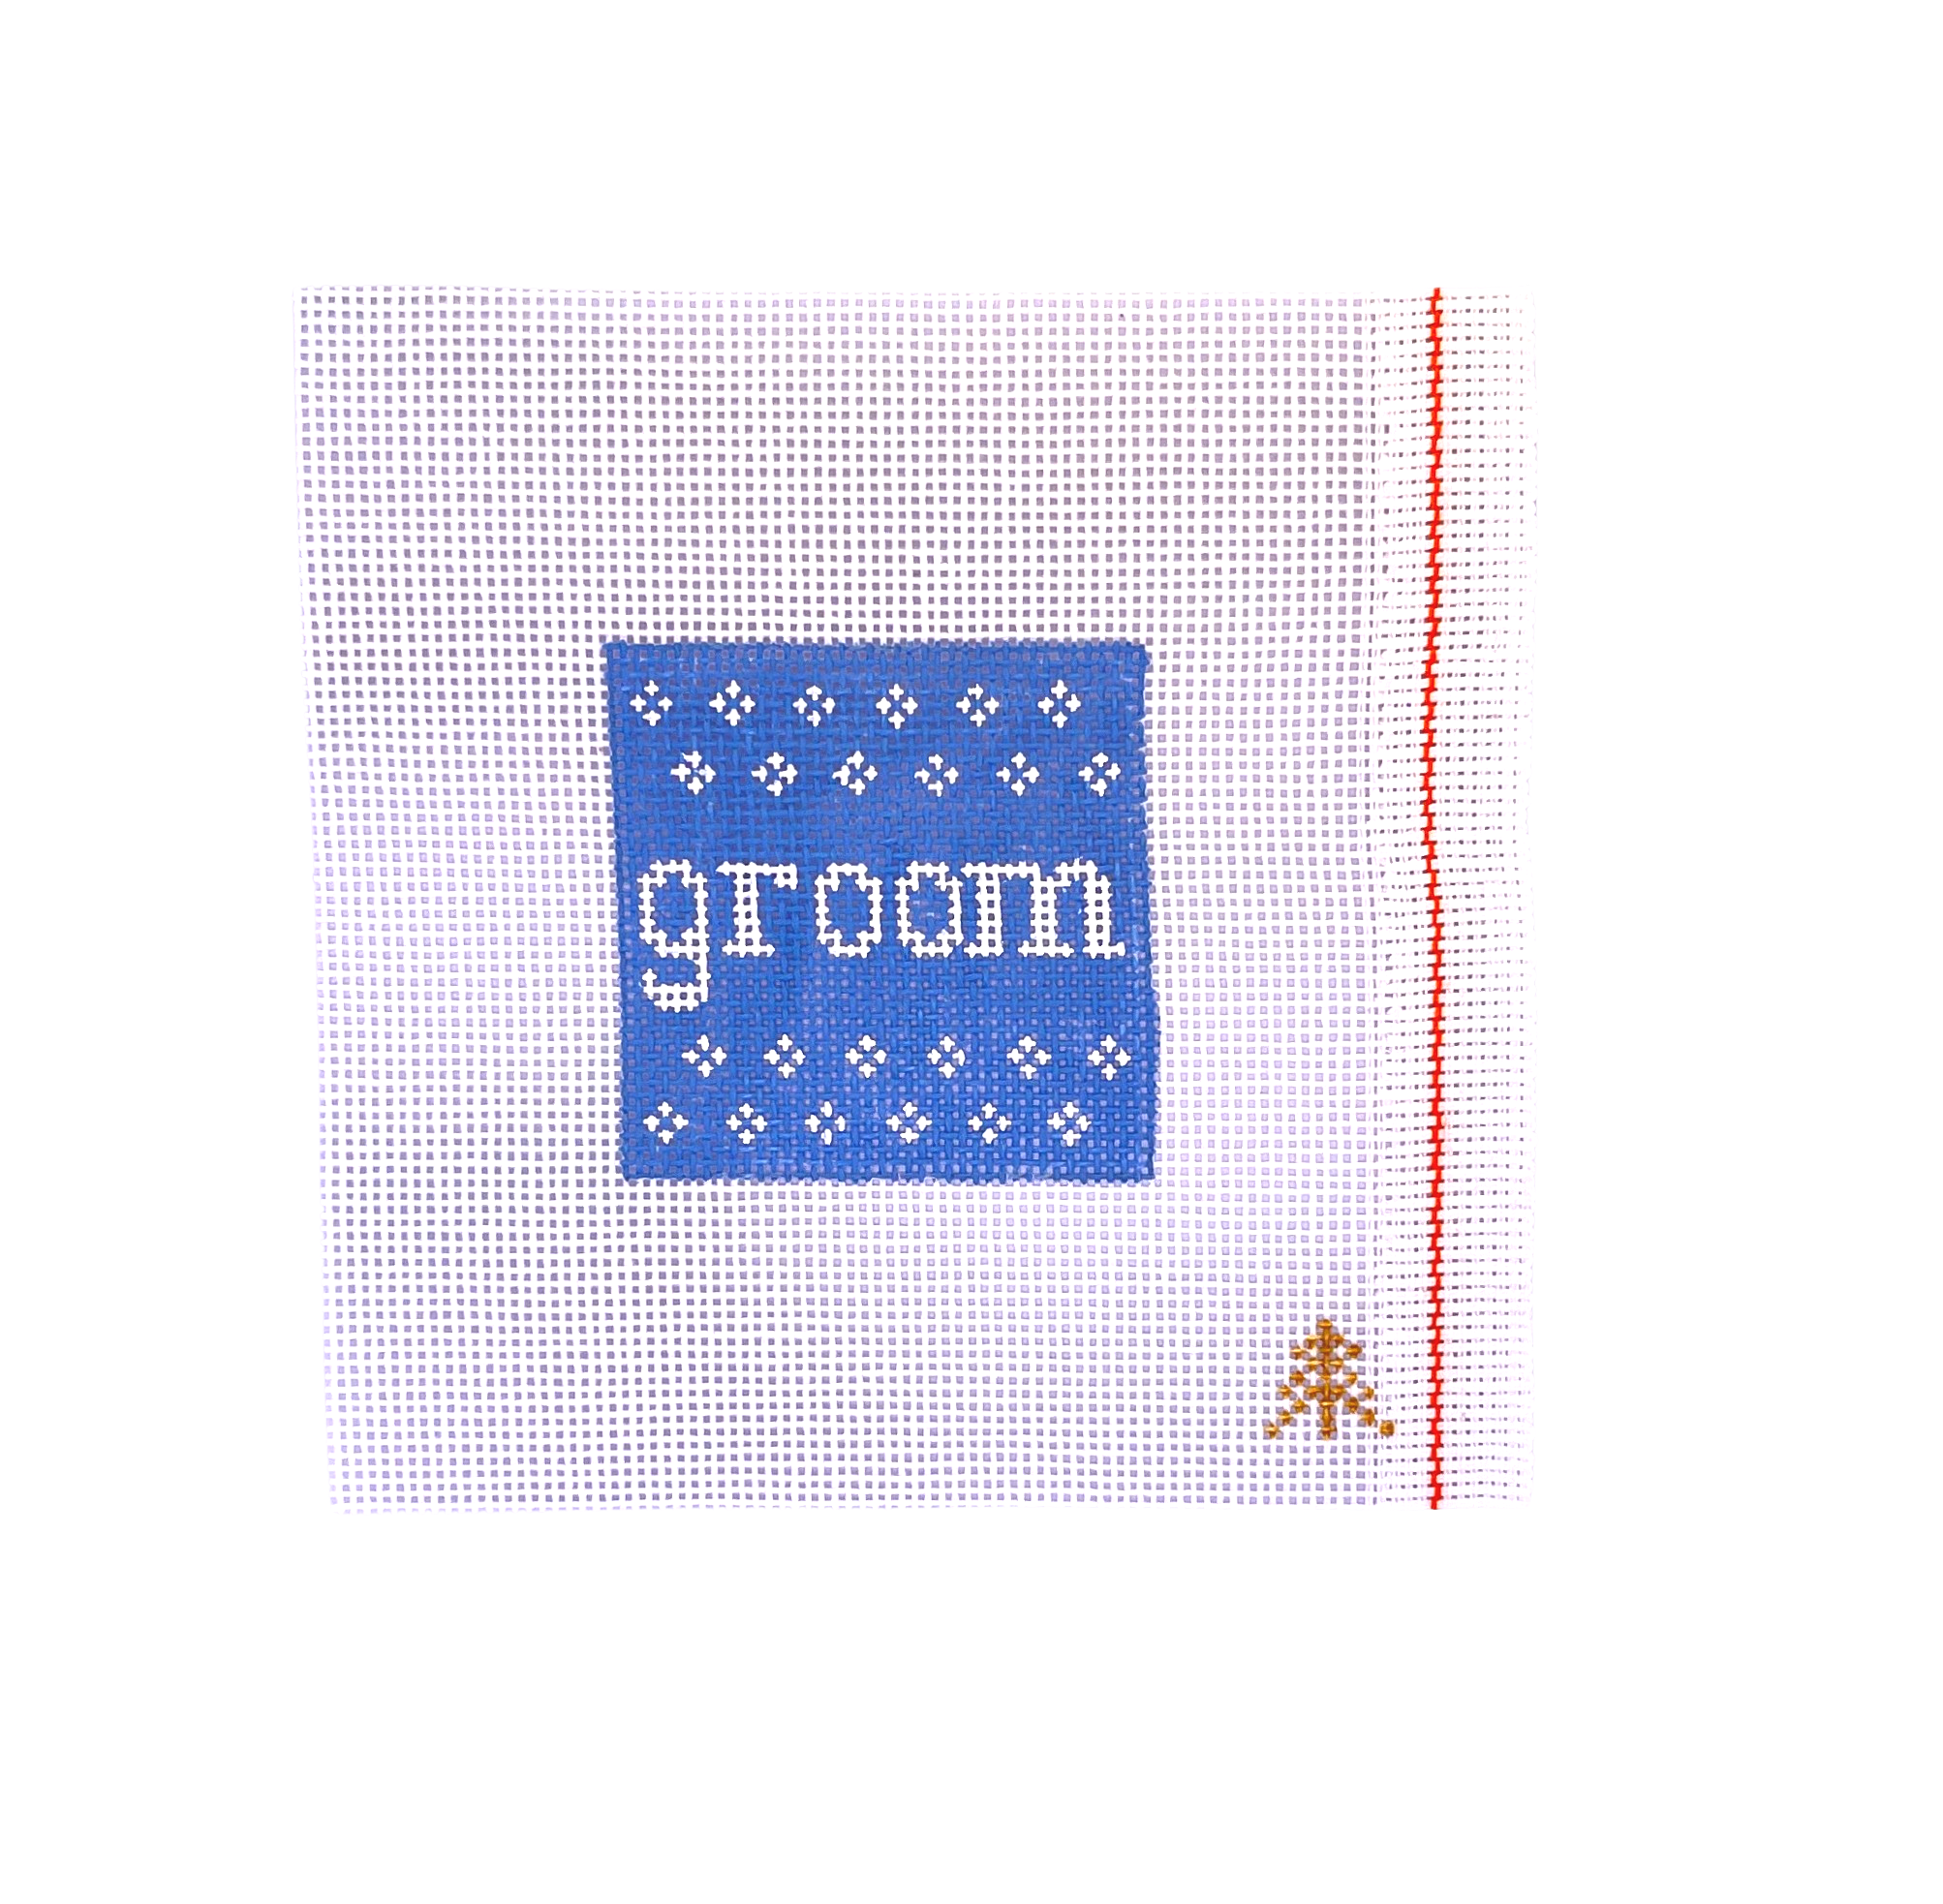 Groom Needlepoint Canvas Insert for Can Cozy